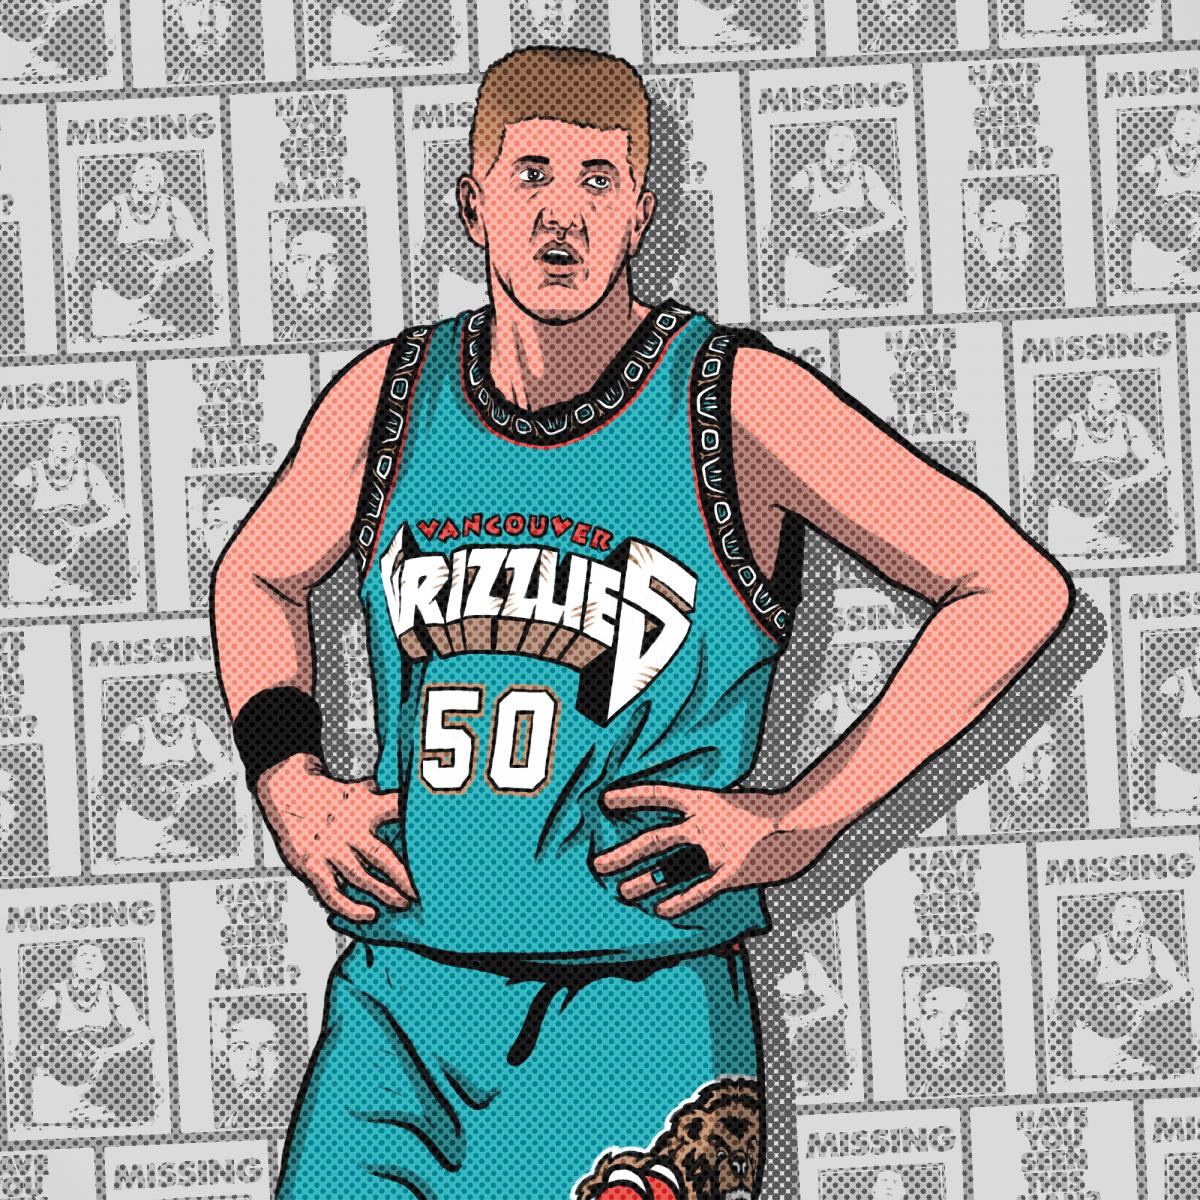 Official Bryant reeves #50 vancouver grizzlies basketball big